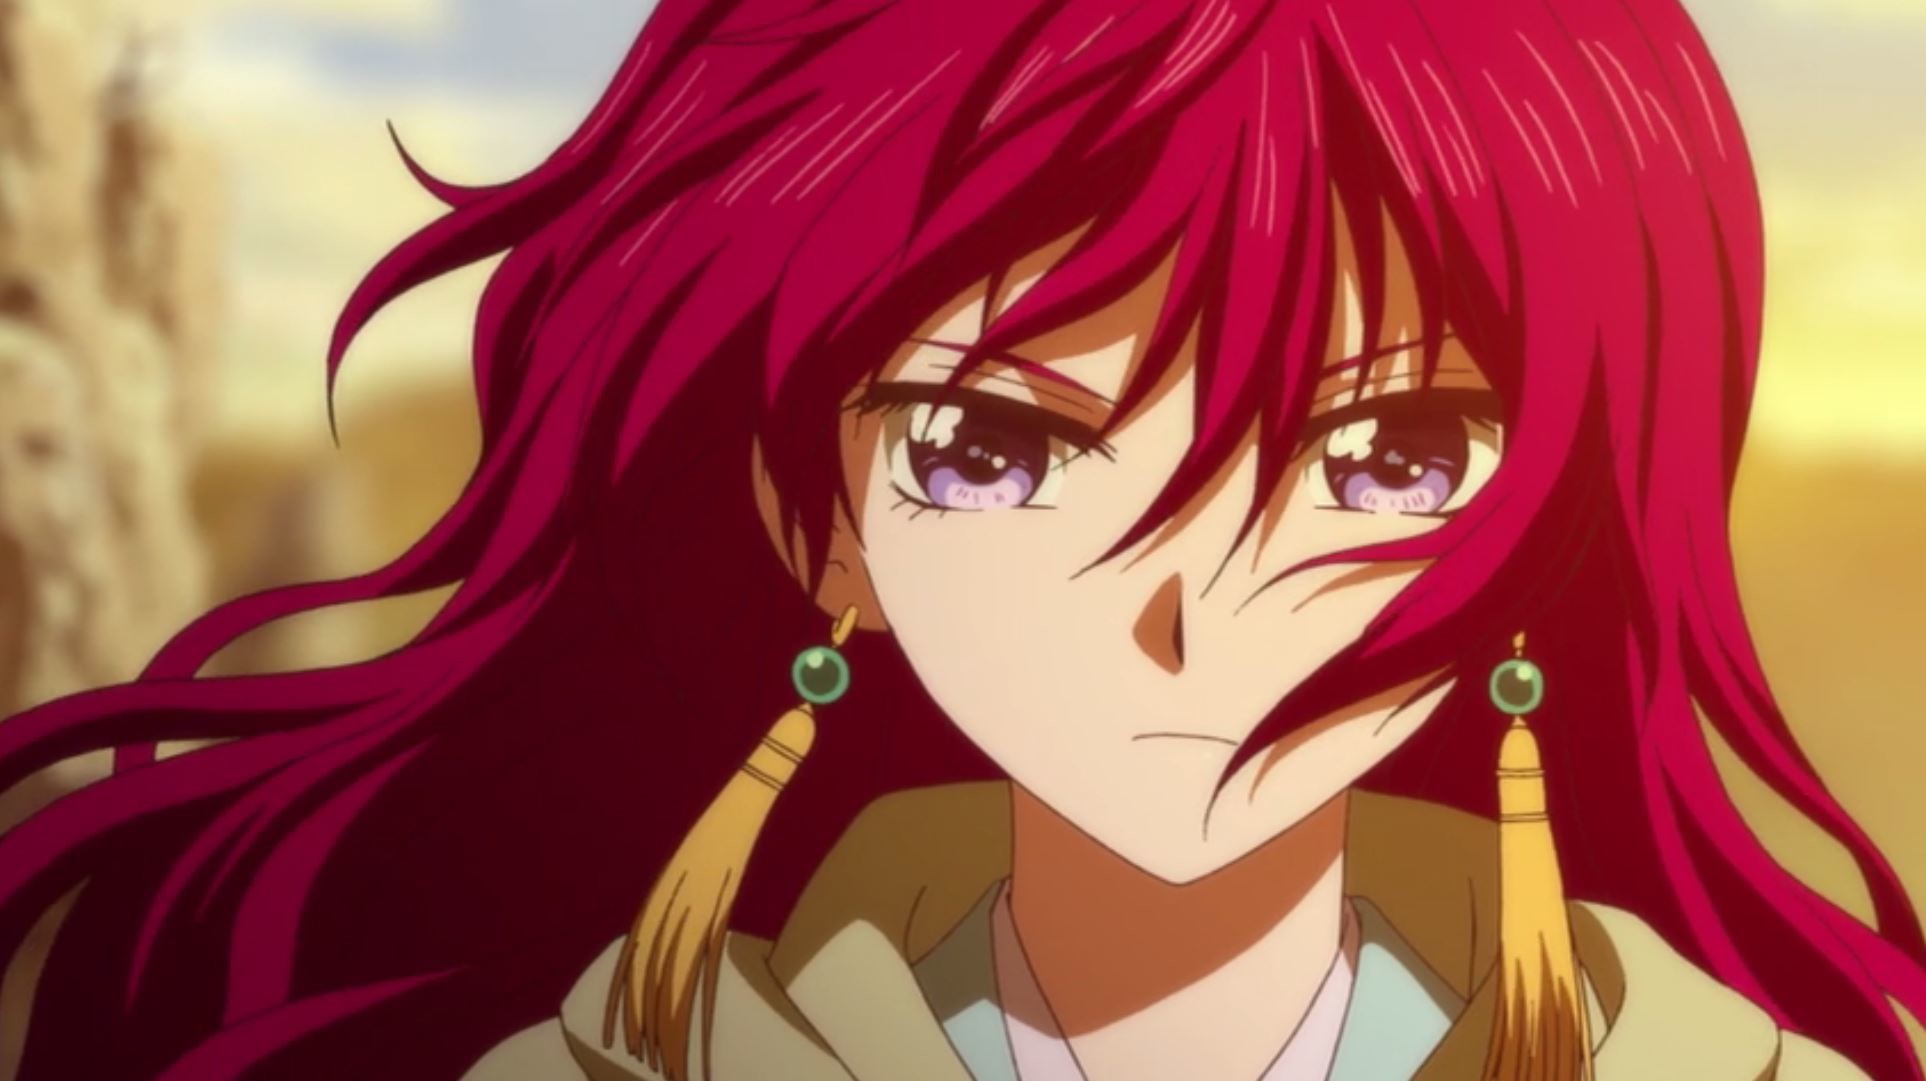 1926x1081 Which Akatsuki No Yona Character Are You Most Like?